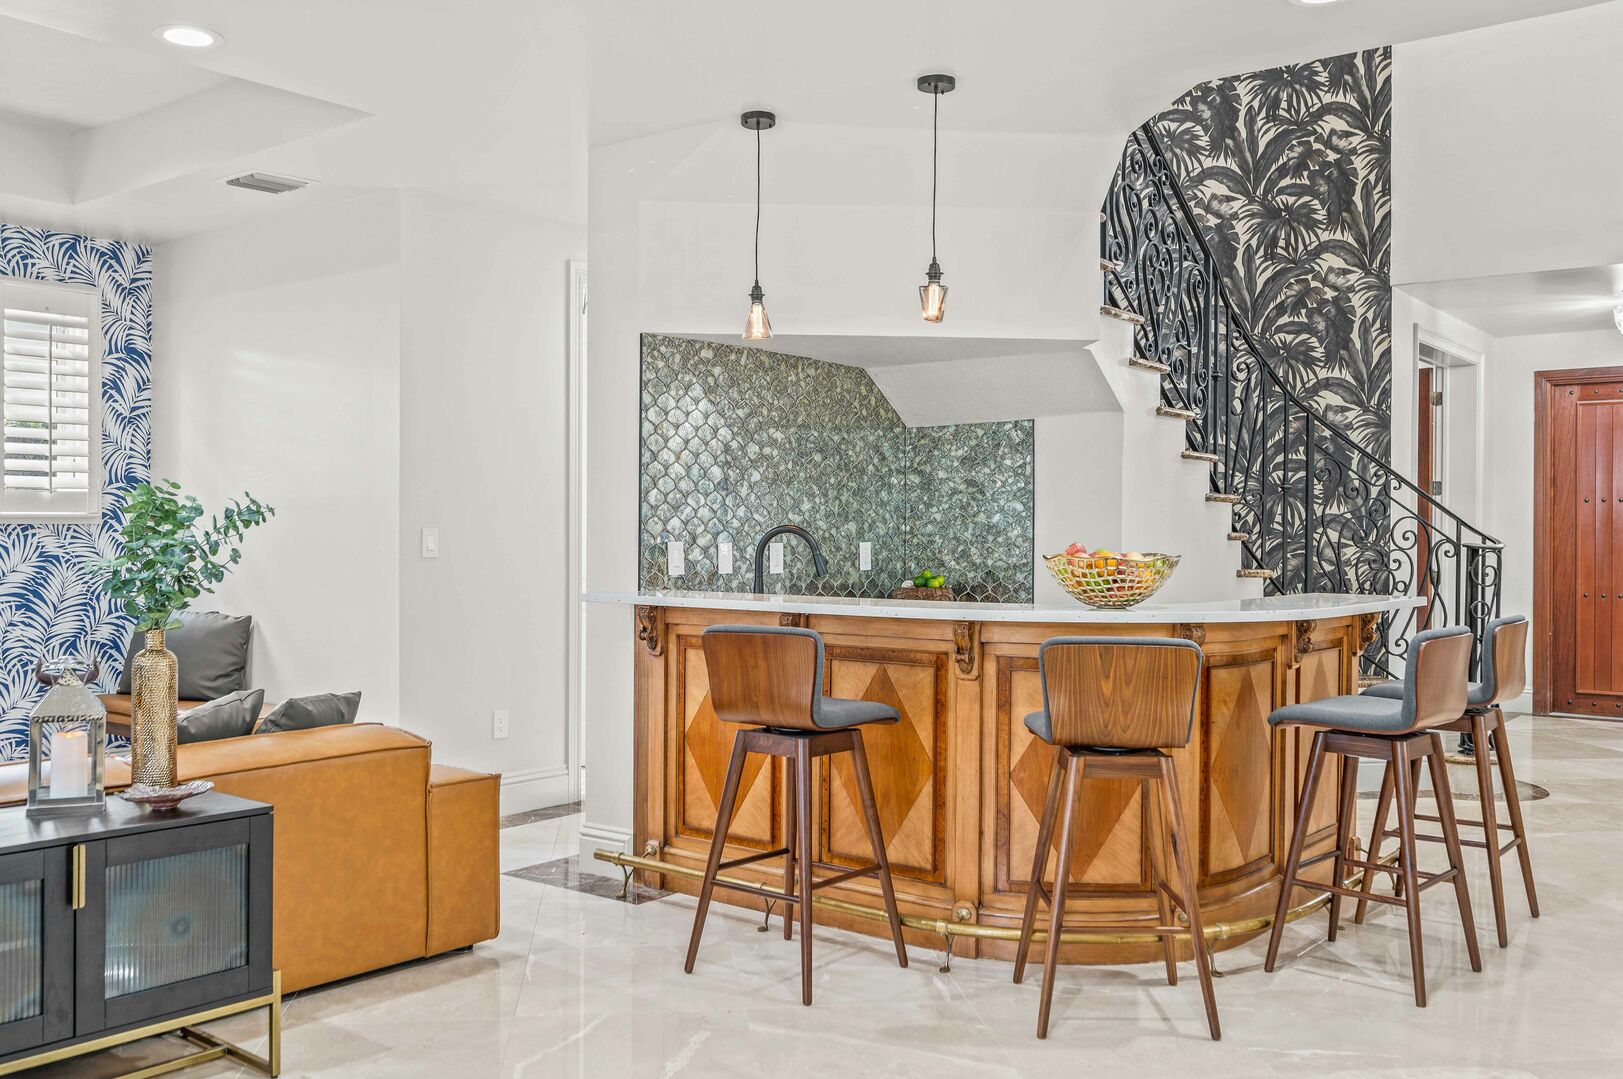 The wet bar with the adorned with Versace wallpaper as background seats four.